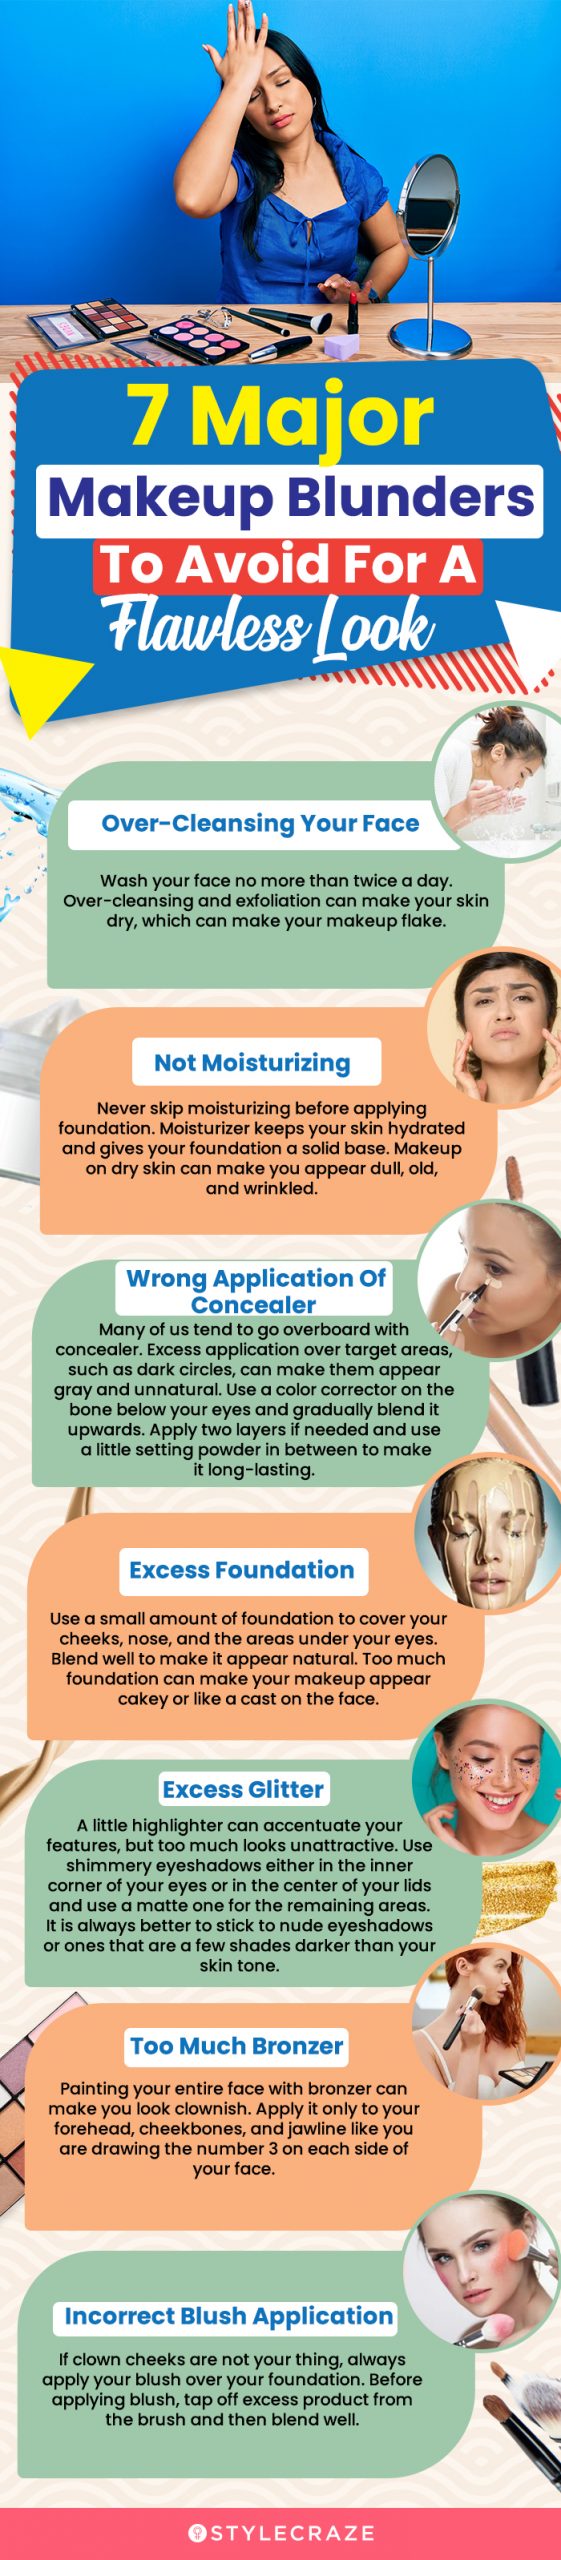 7 major makeup blunders to avoid for a flawless look(infographic)